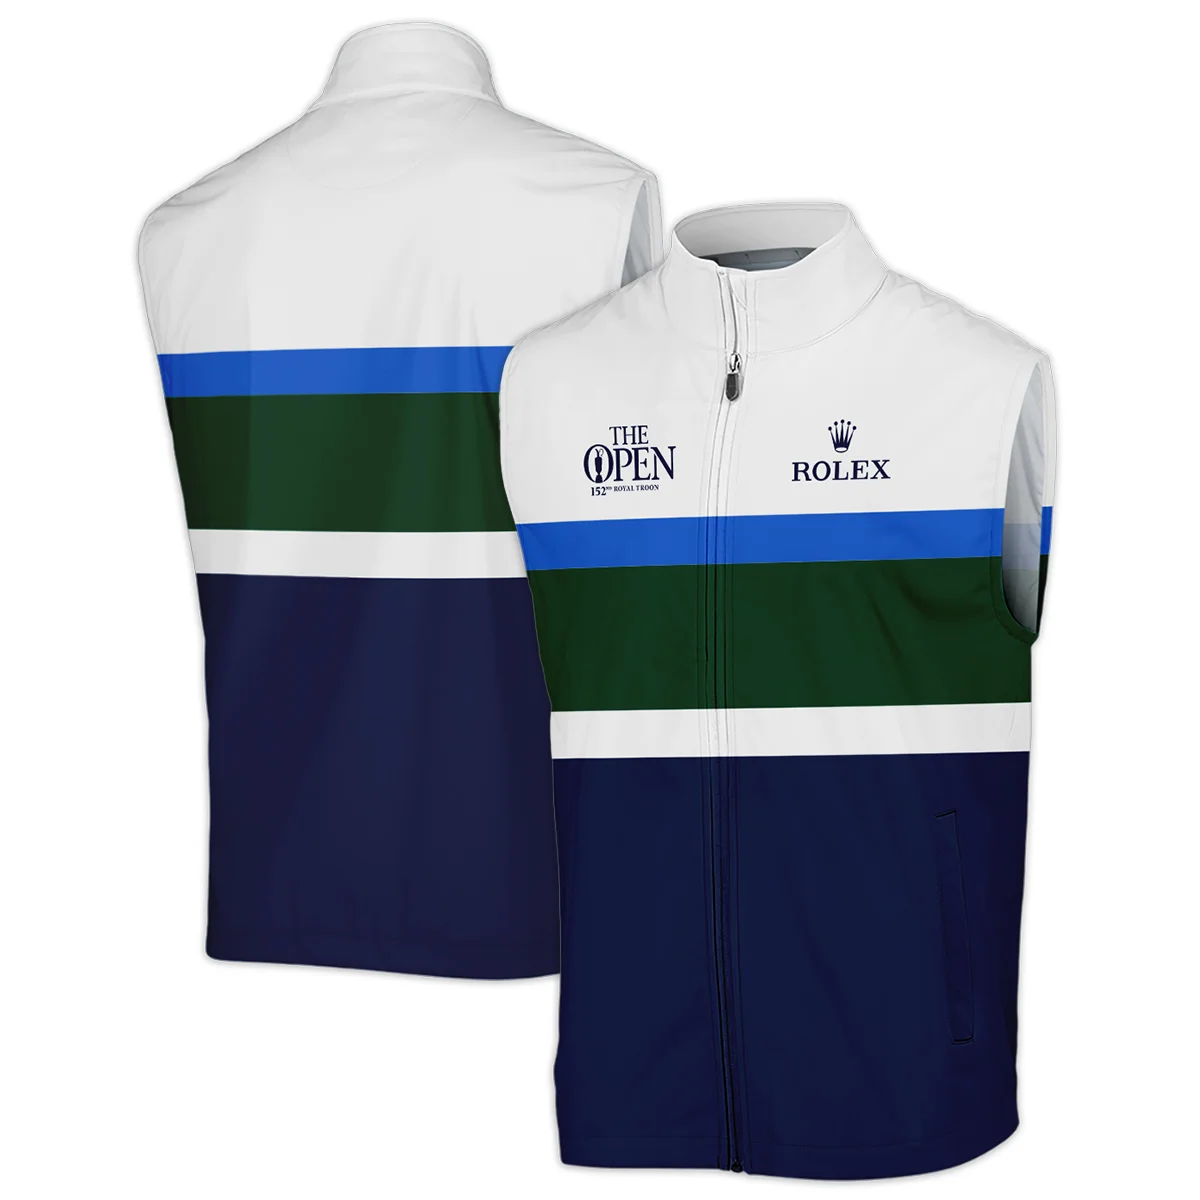 White Blue Green Background Rolex 152nd Open Championship Polo Shirt All Over Prints HOTOP270624A01ROXPL